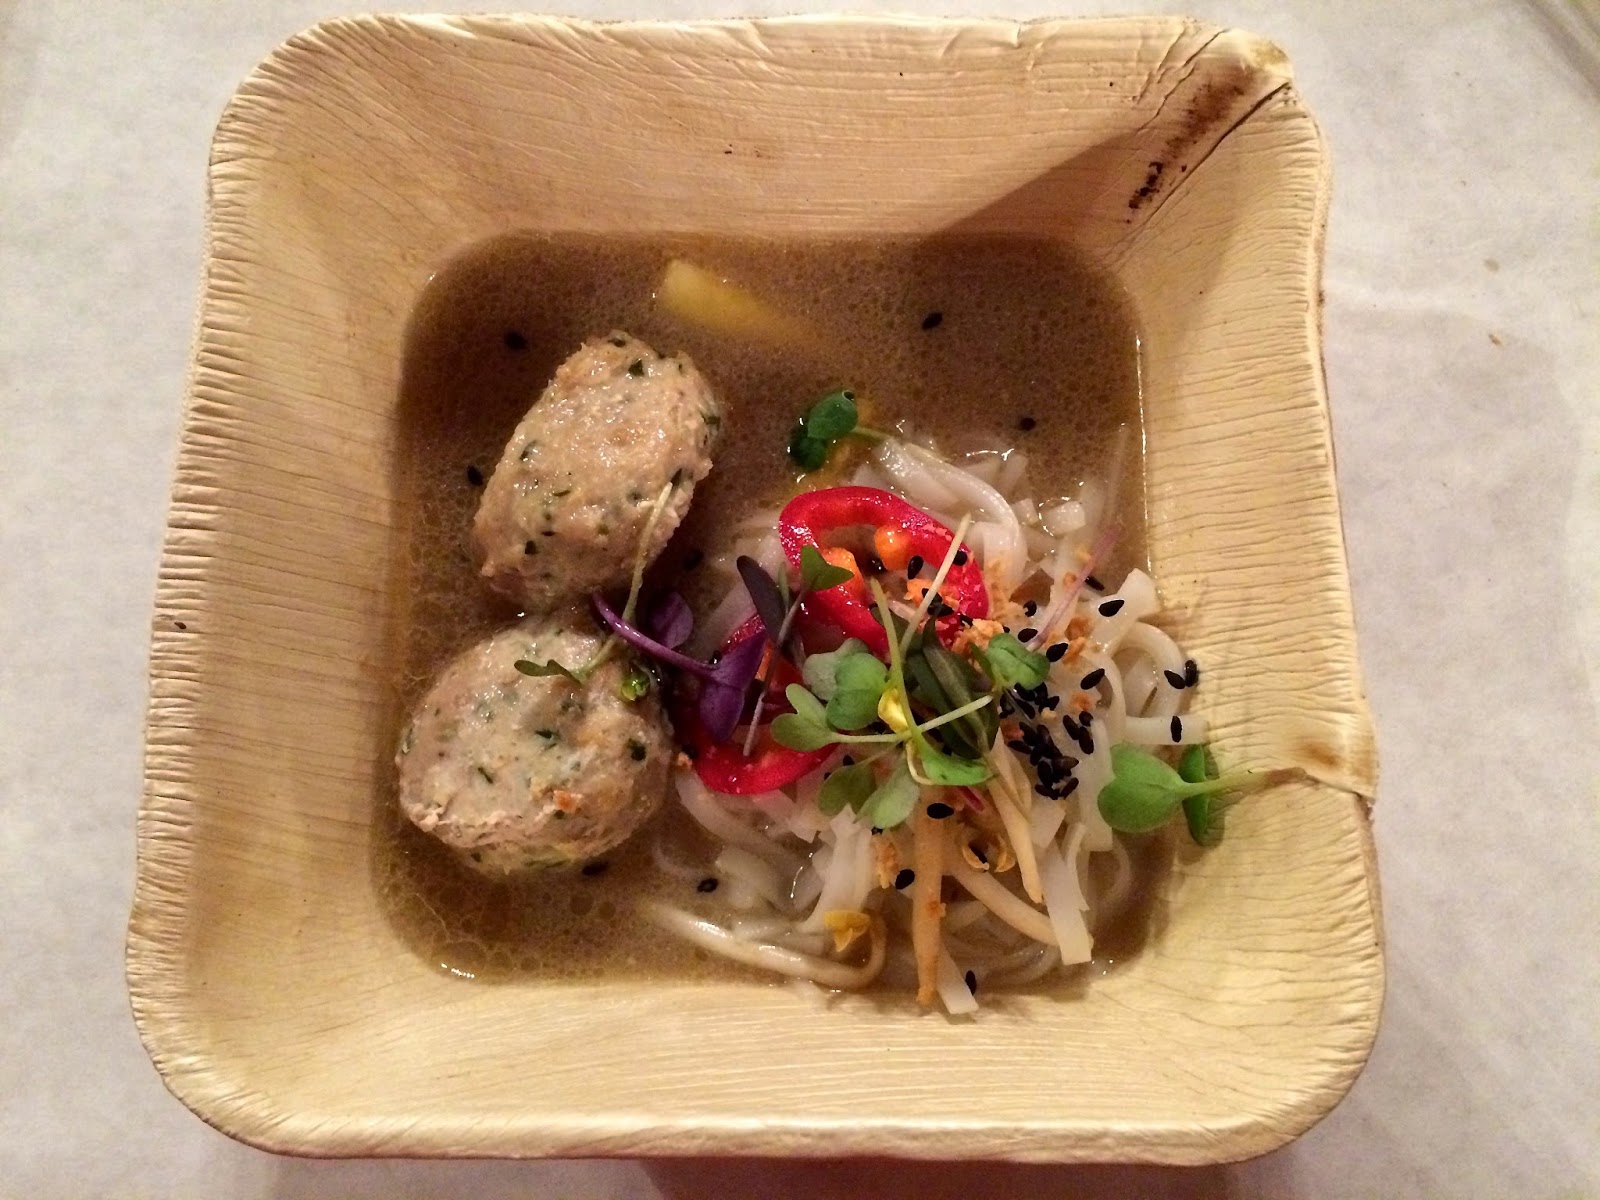 Third Course: Tamarind Stew with Fish Dumplings, Rice Noodles, and Red Chilies